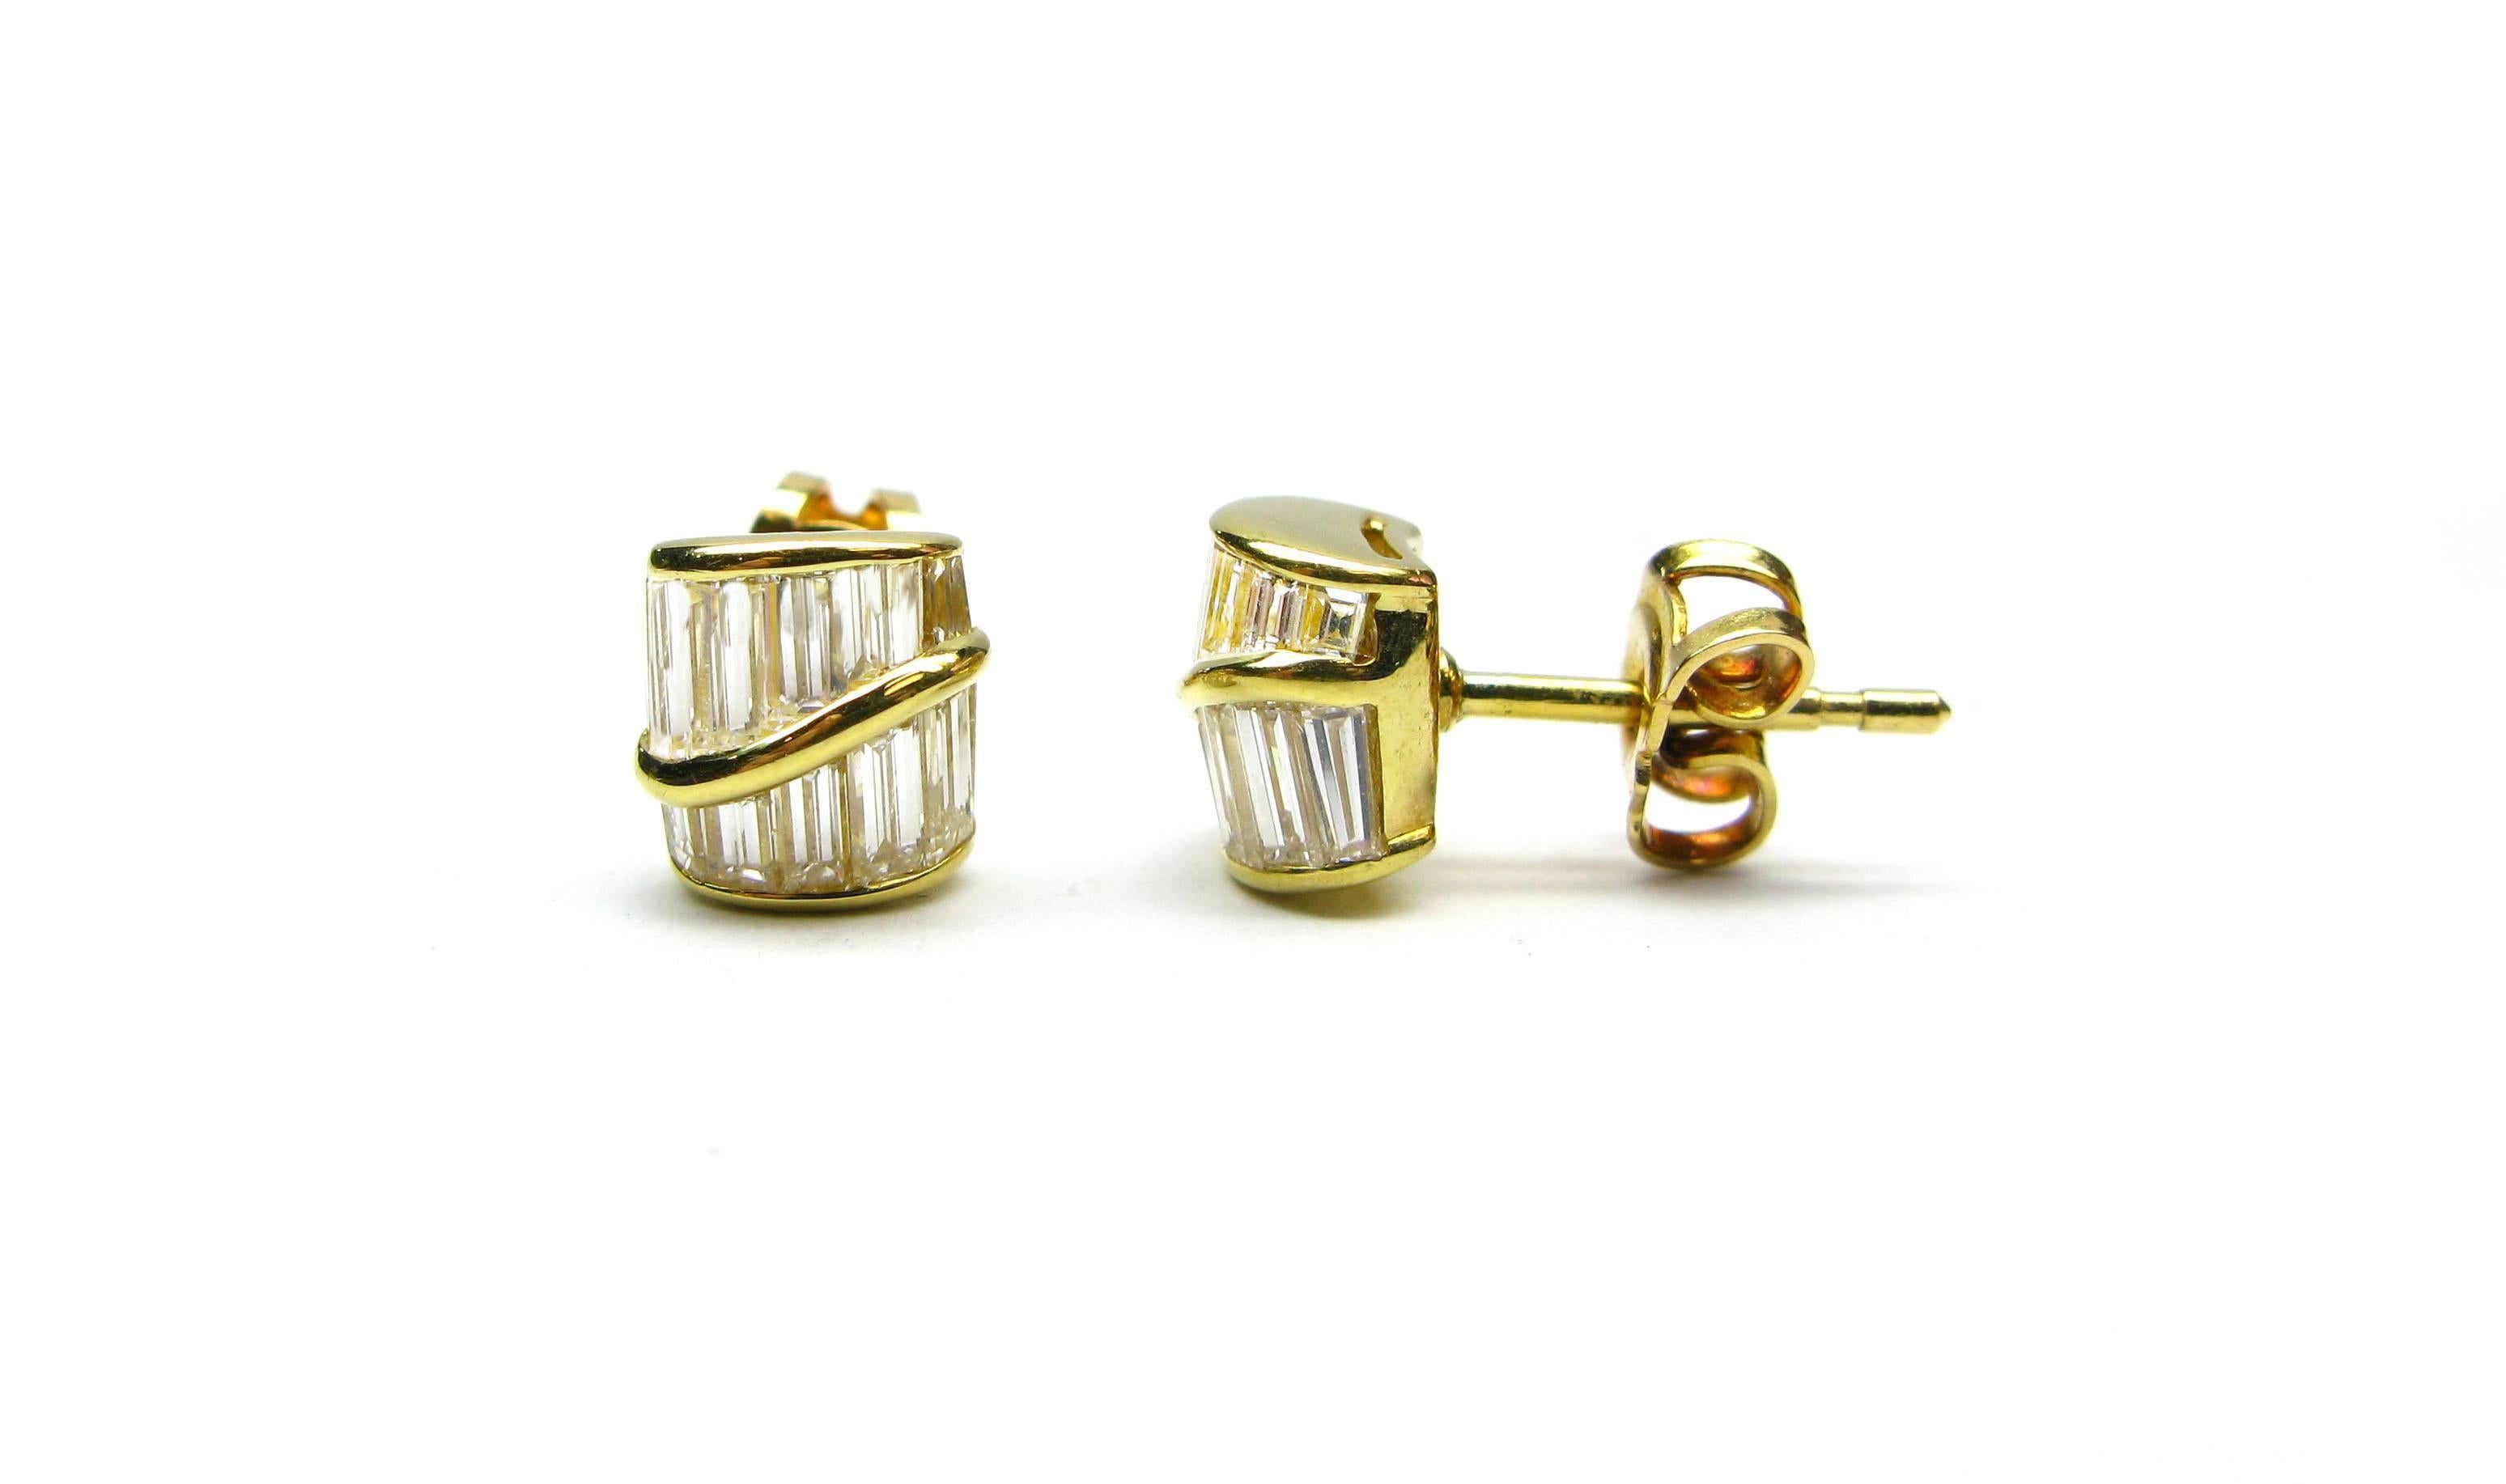 These lovely earrings are part of the Kurt Wayne collection. This unique alternative to the basic round brilliant stud features 1.76ctw of straight baguette diamonds bezel set into highly polished 18kt yellow gold. Be the envy of all your friends